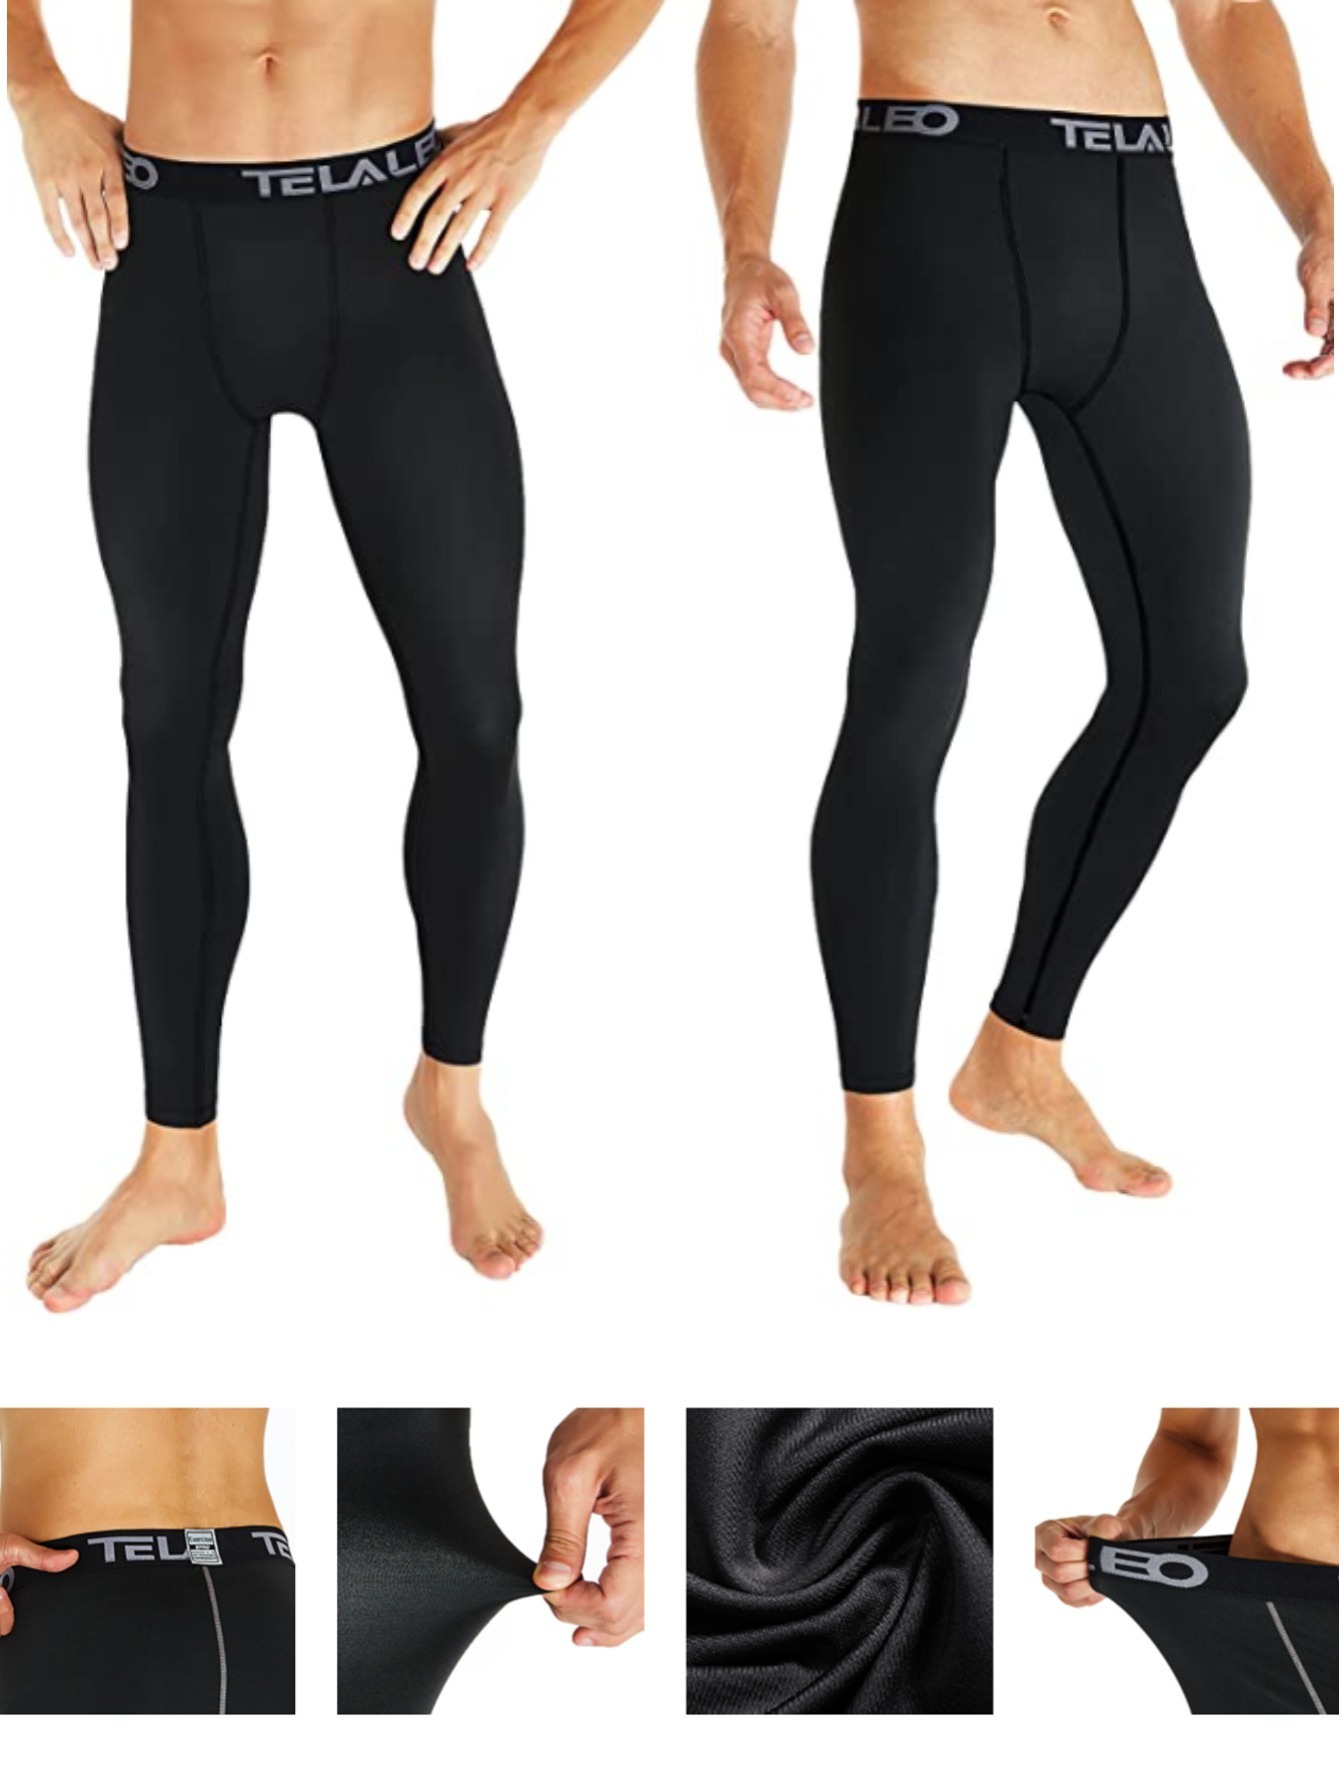 Yuerlian Men's Compression Pants with Pockets, Men's Thermal Underwear Pants,  Sport Base Layer Leggings, Winter Compression Leggings for Running Workout  Sport Tights 3 Pack price in Saudi Arabia,  Saudi Arabia